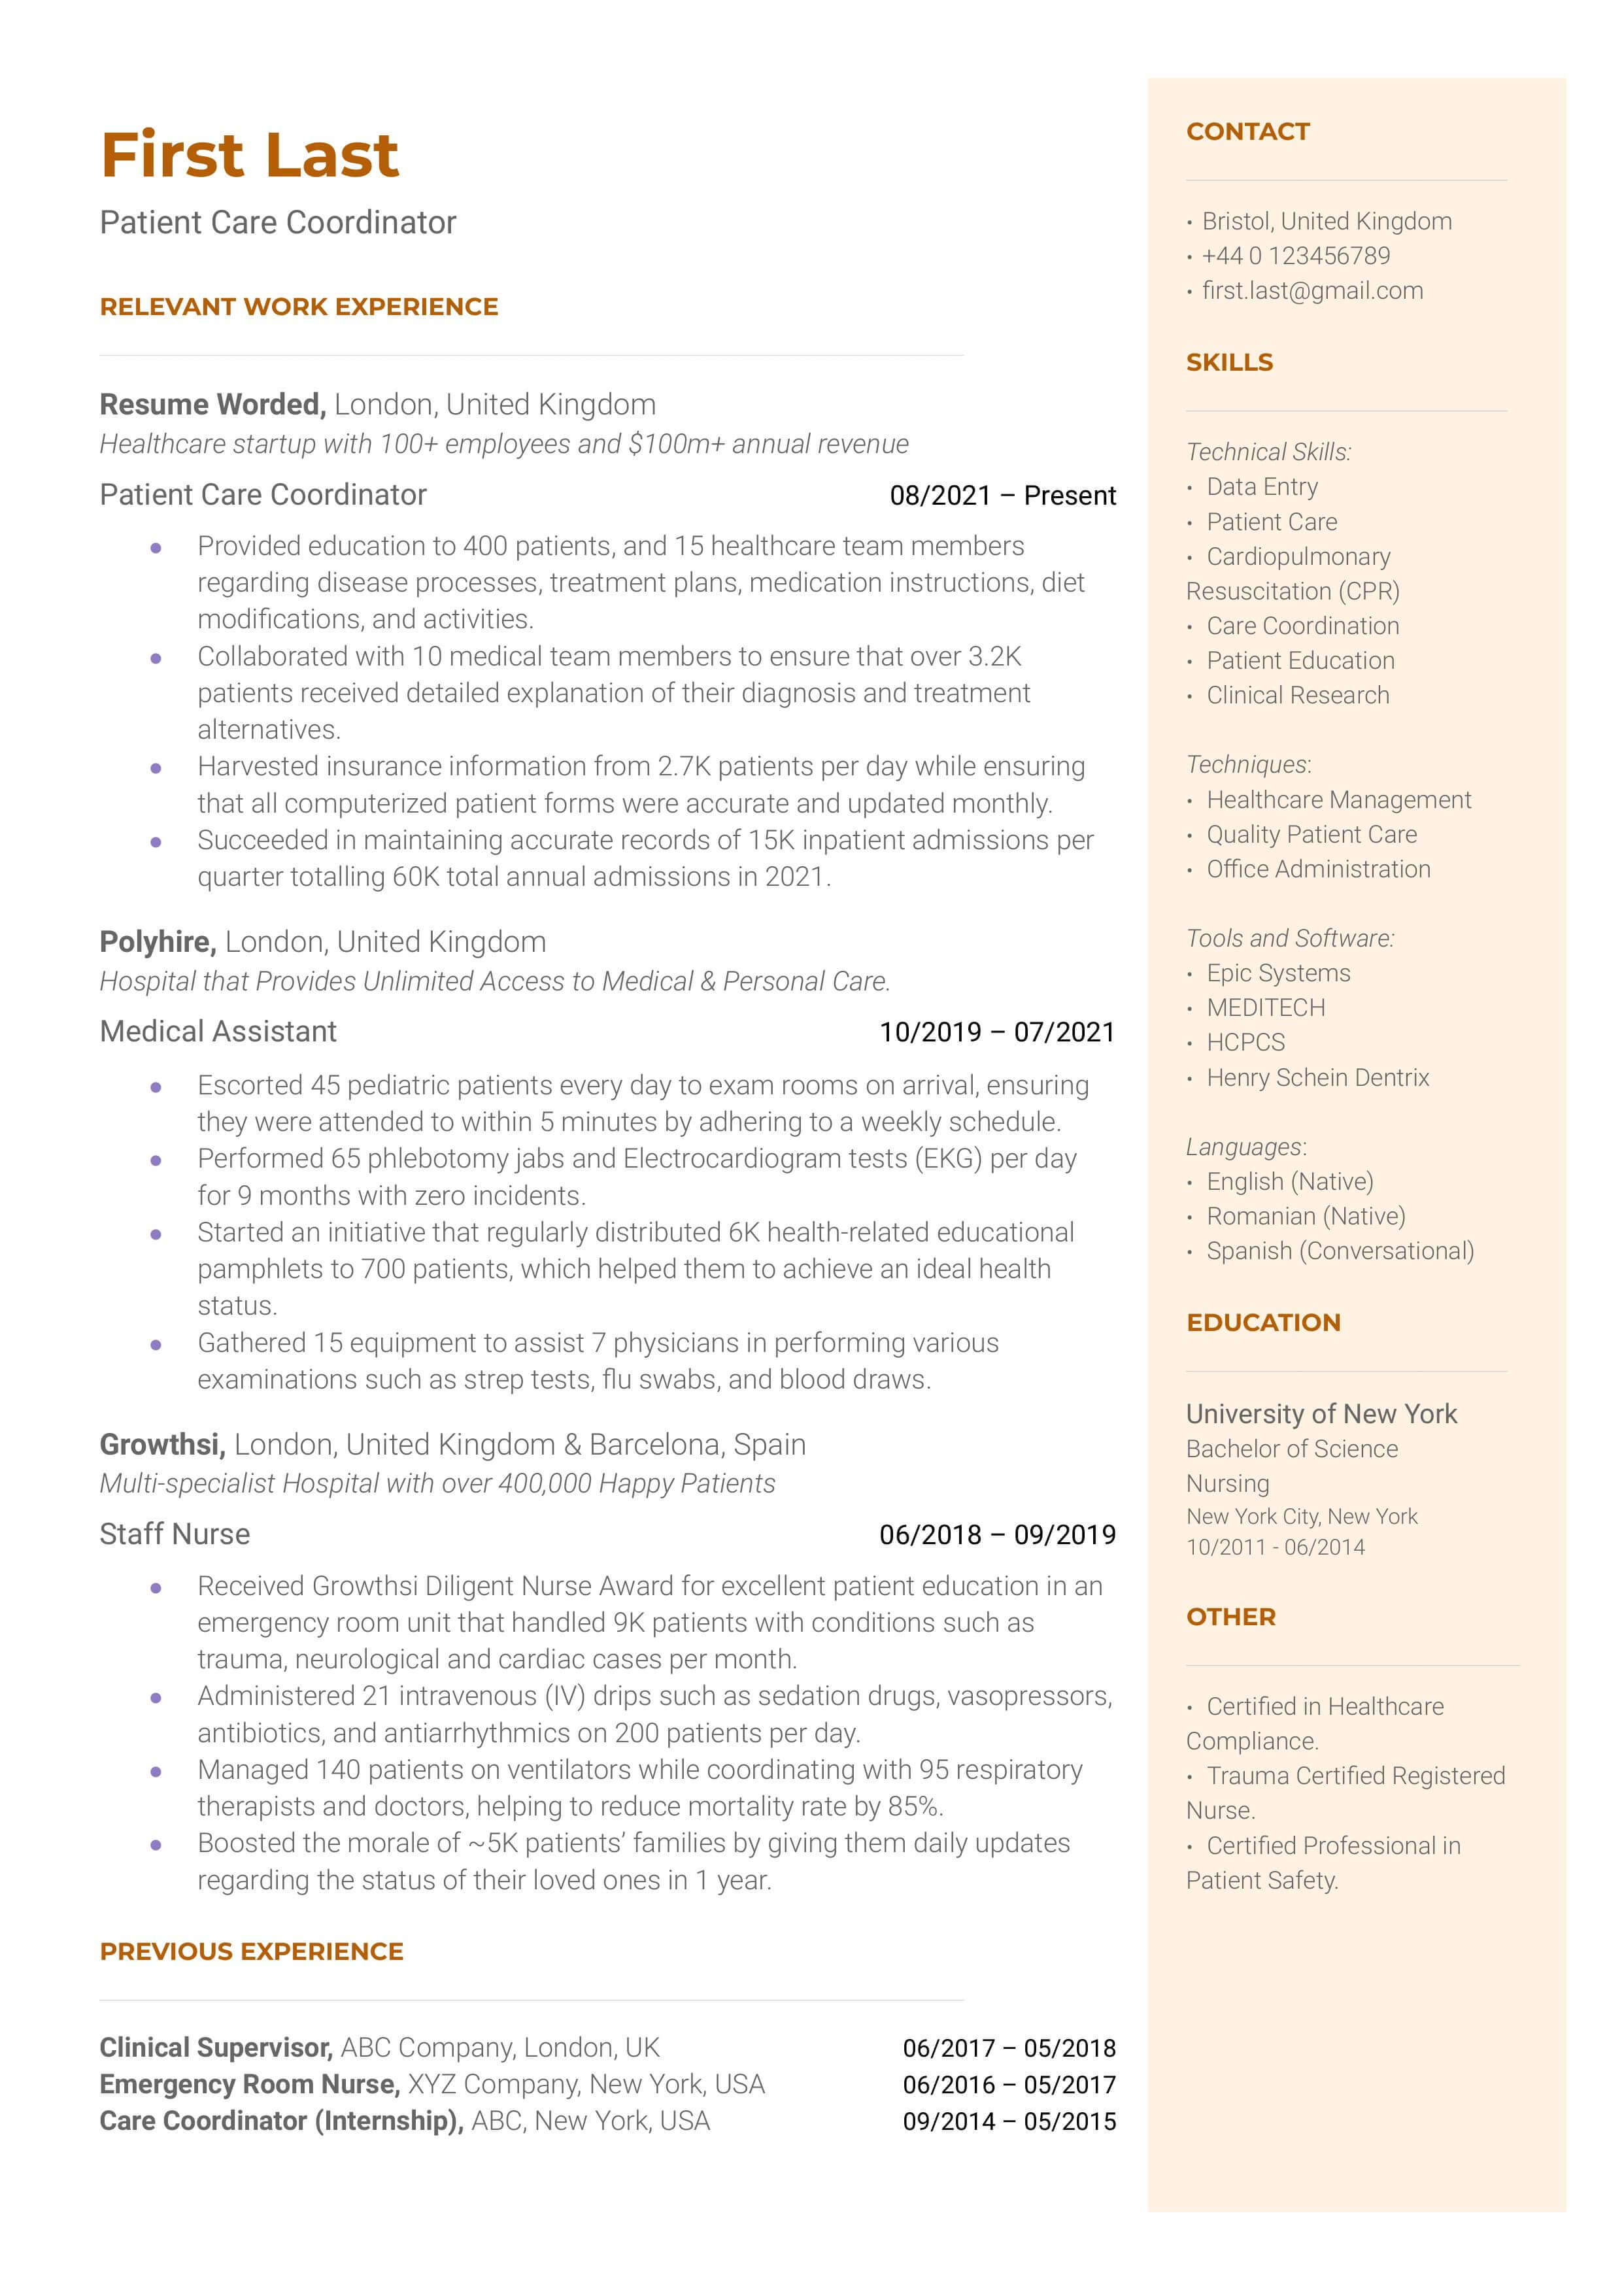 A patient care coordinator resume sample that highlights the applicant's experience caring for patients and industry standard tools list.